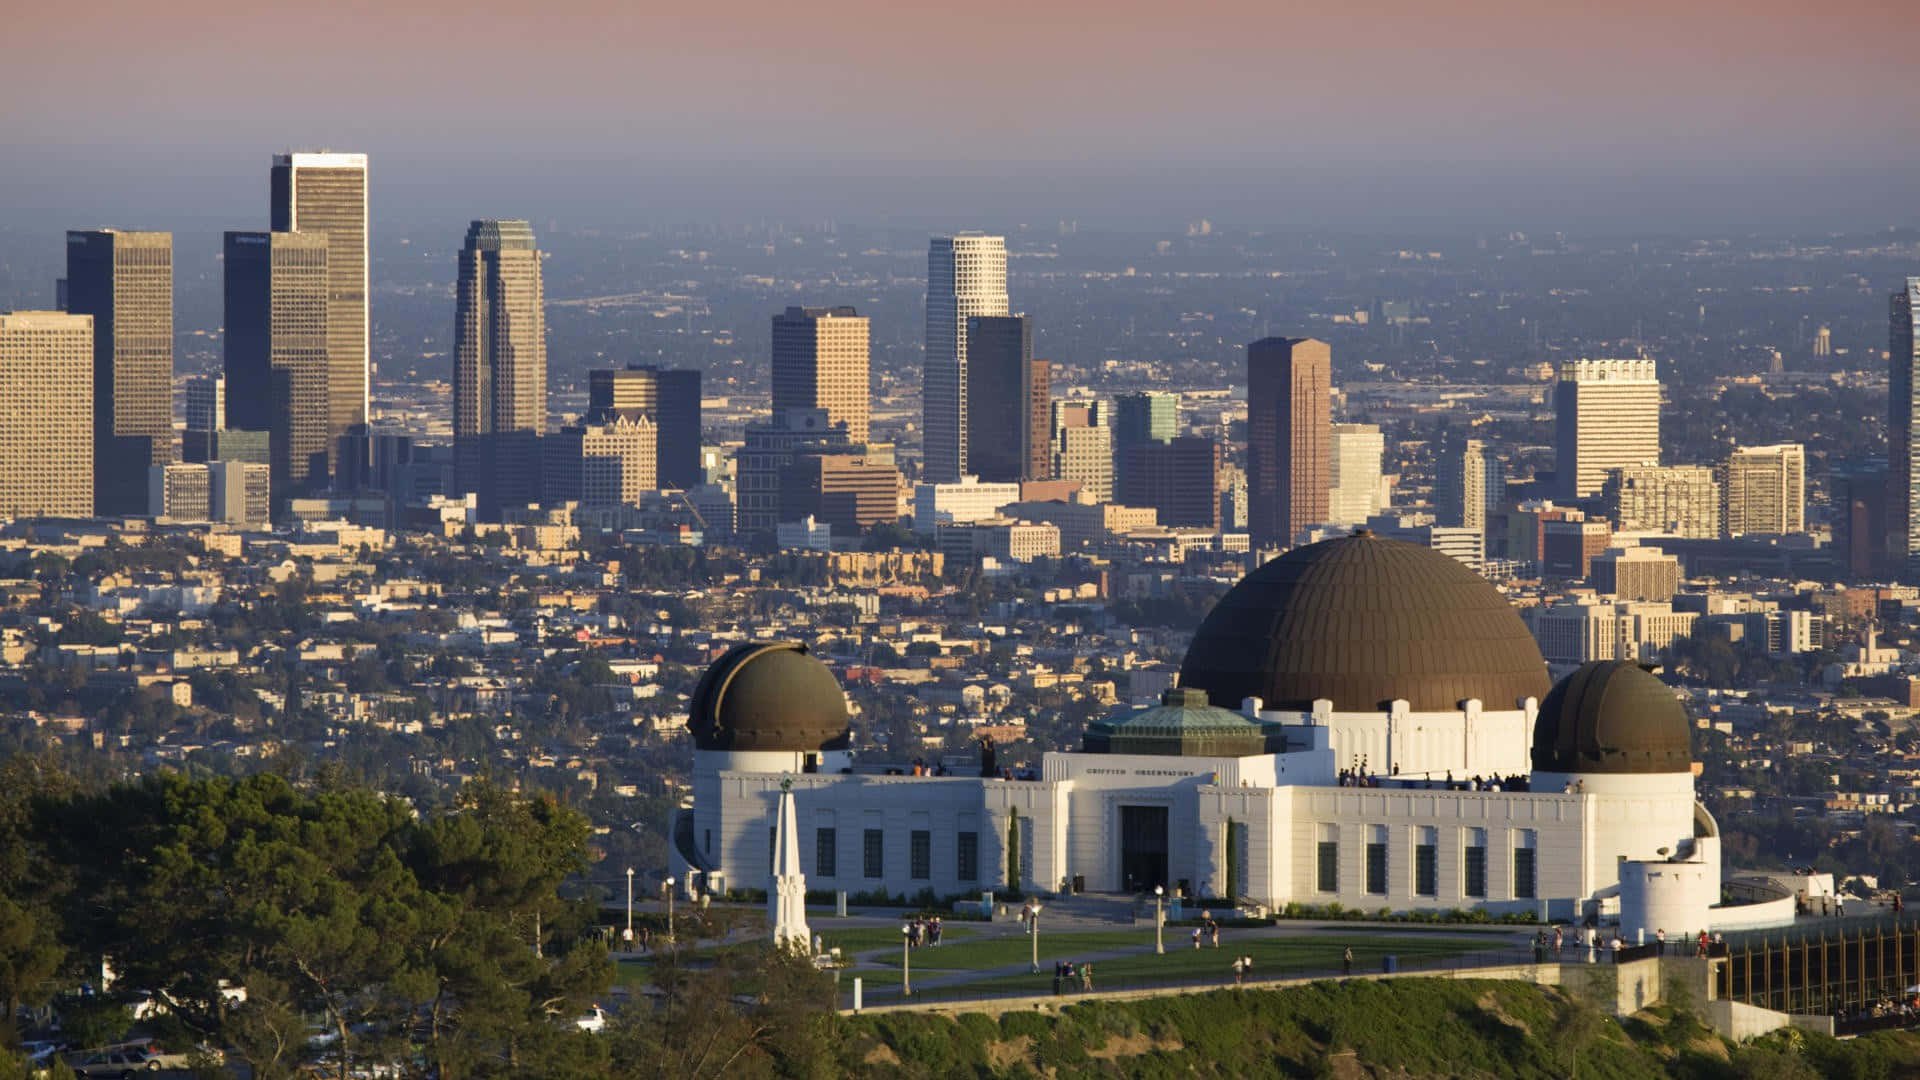 Enjoy the City of Angels from this beautiful view of LA.